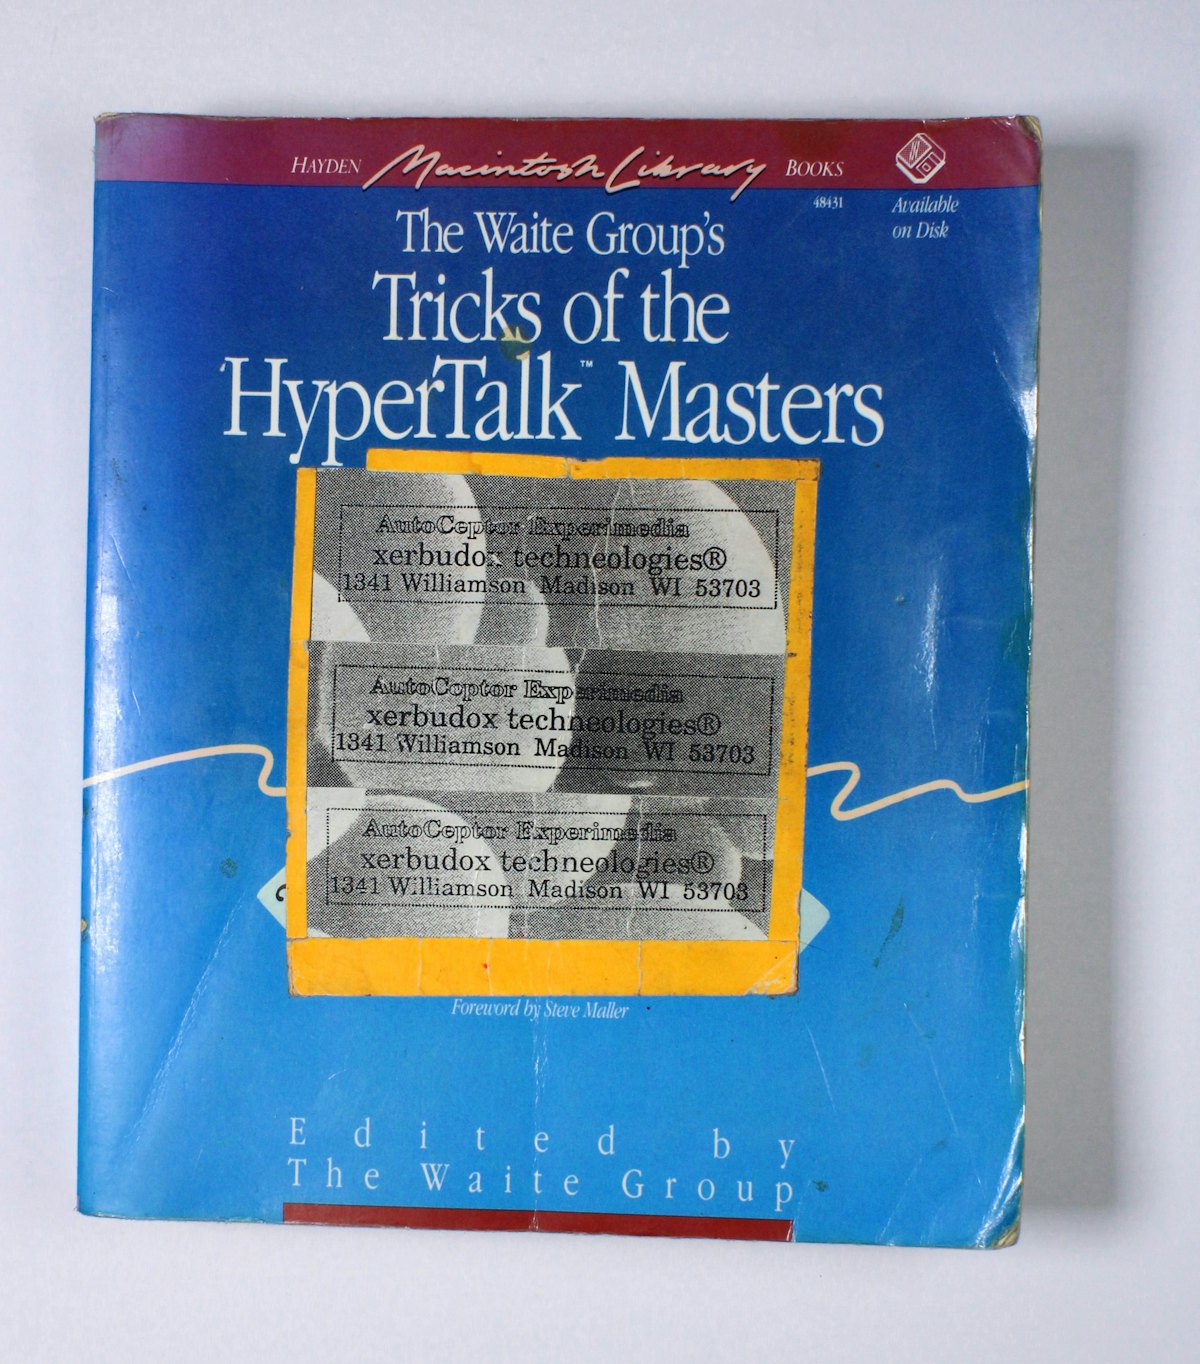 The Waite Group’s Tricks of the HyperTalk Masters